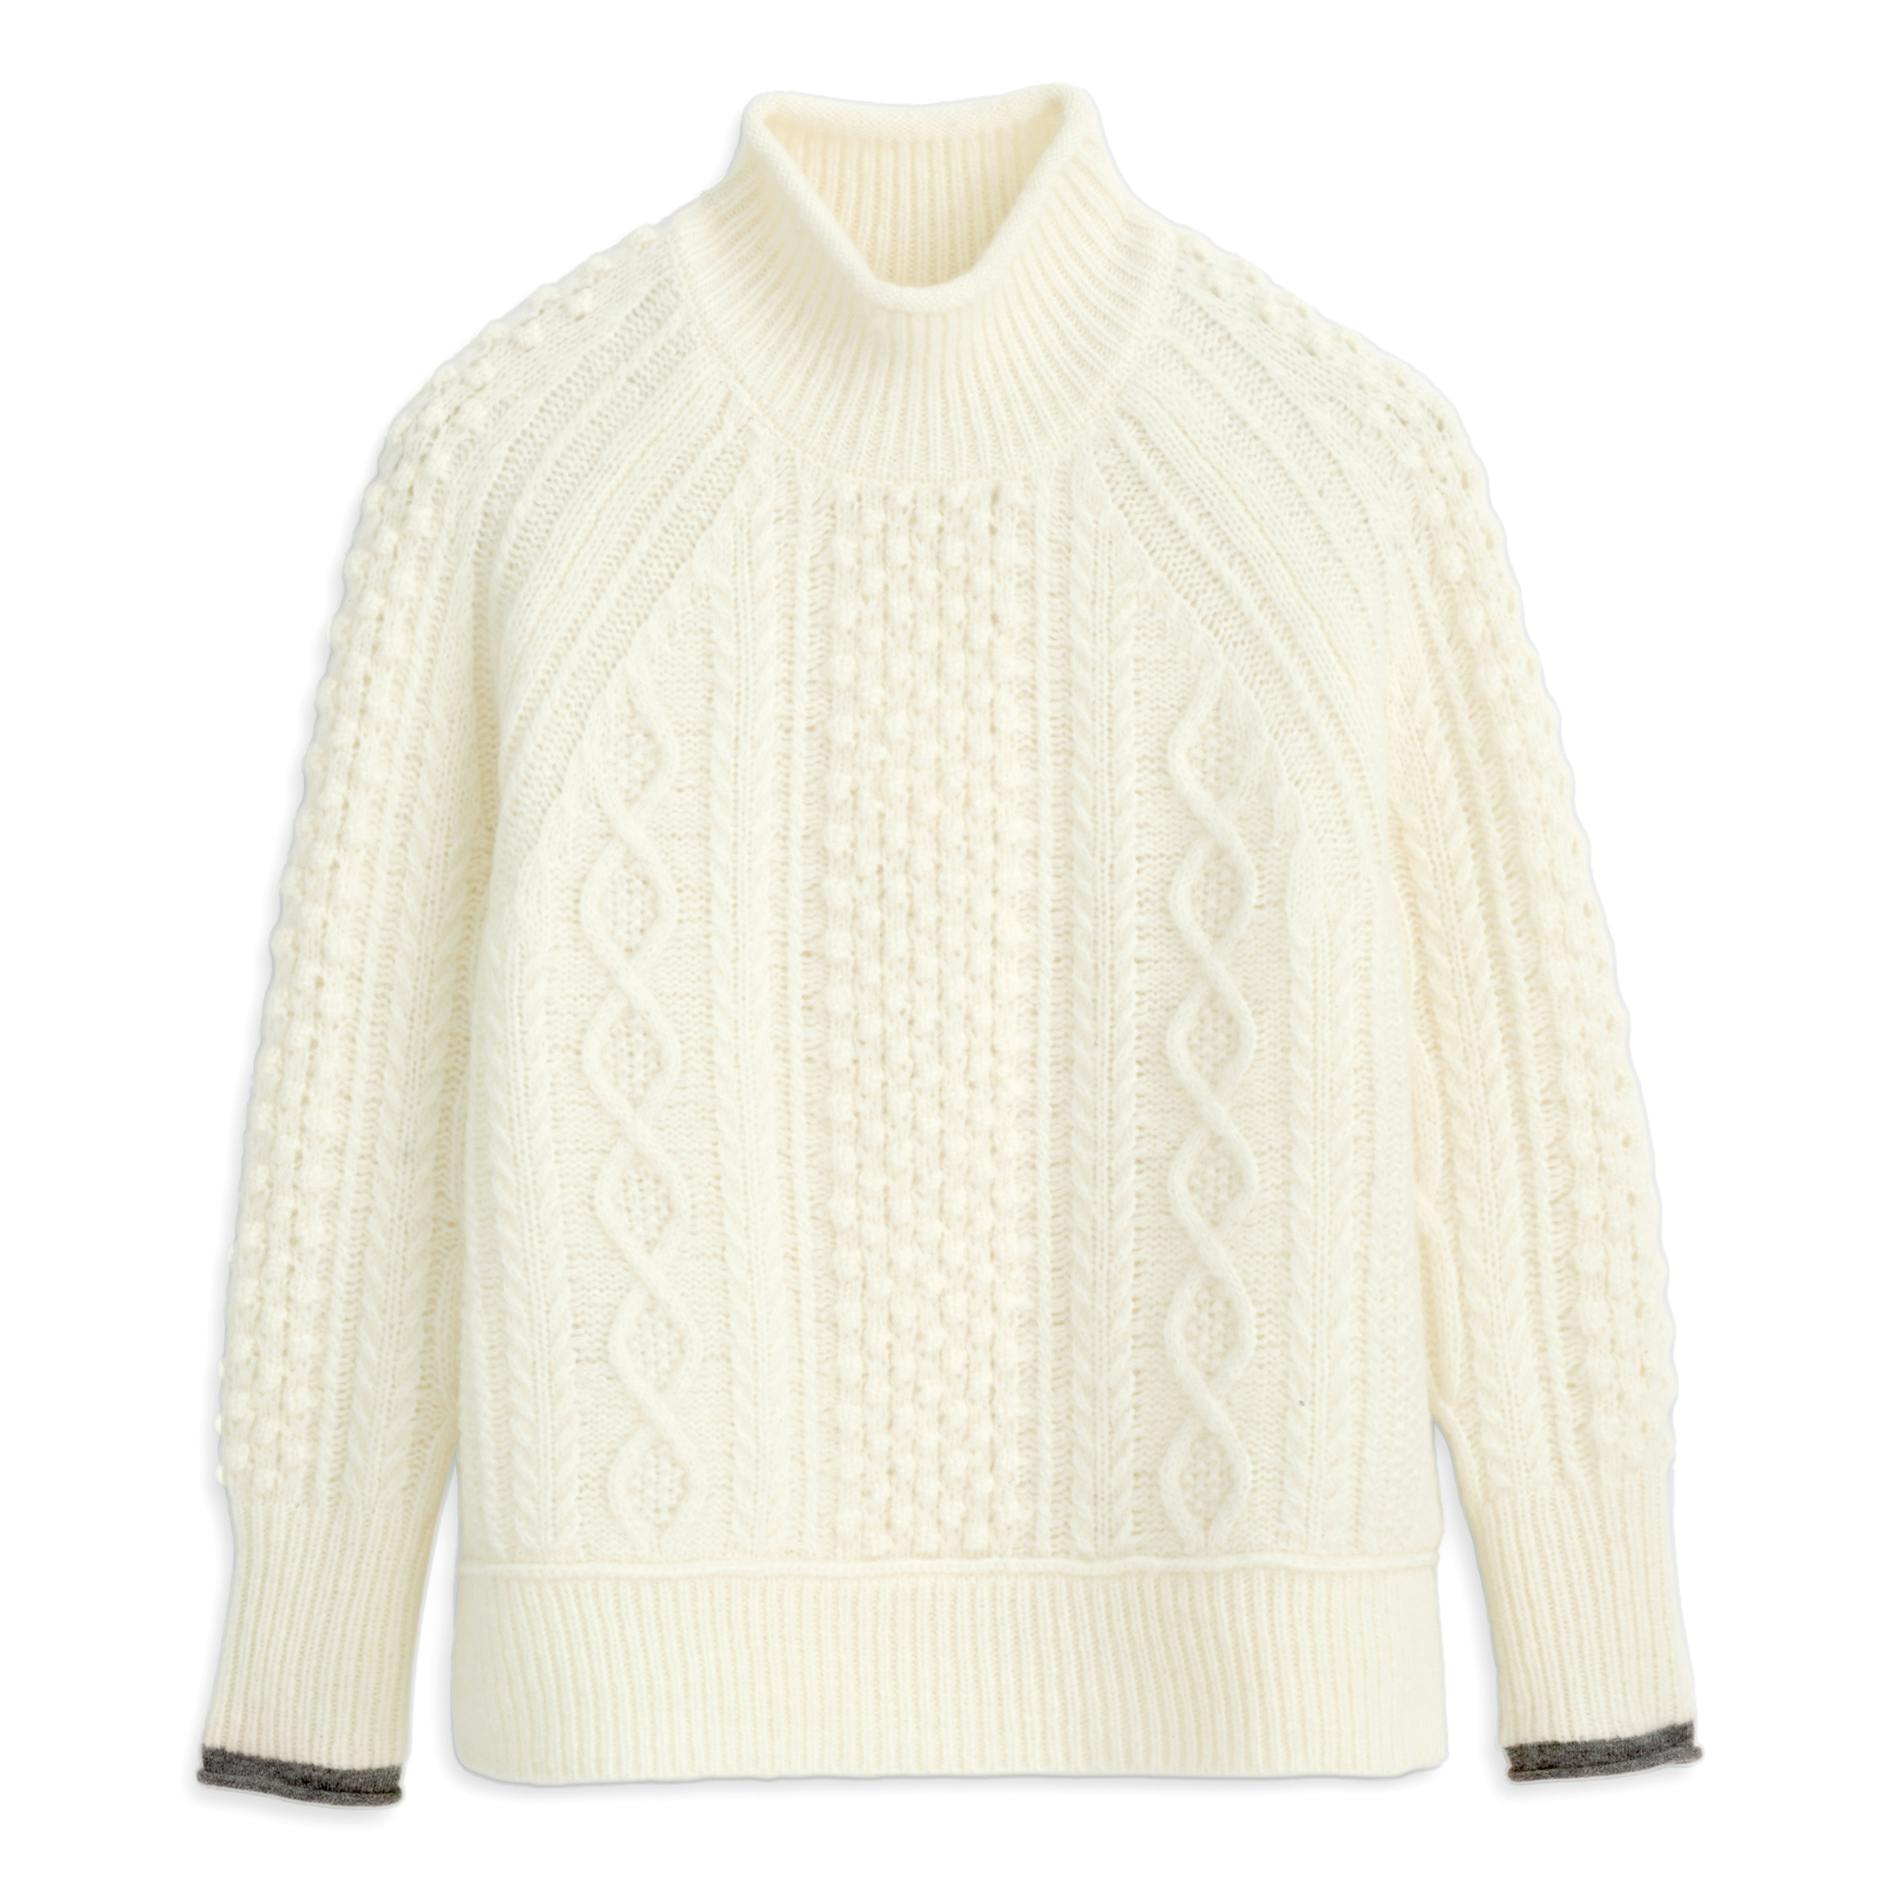 New women's knits have landed at mīere - Mademoiselle